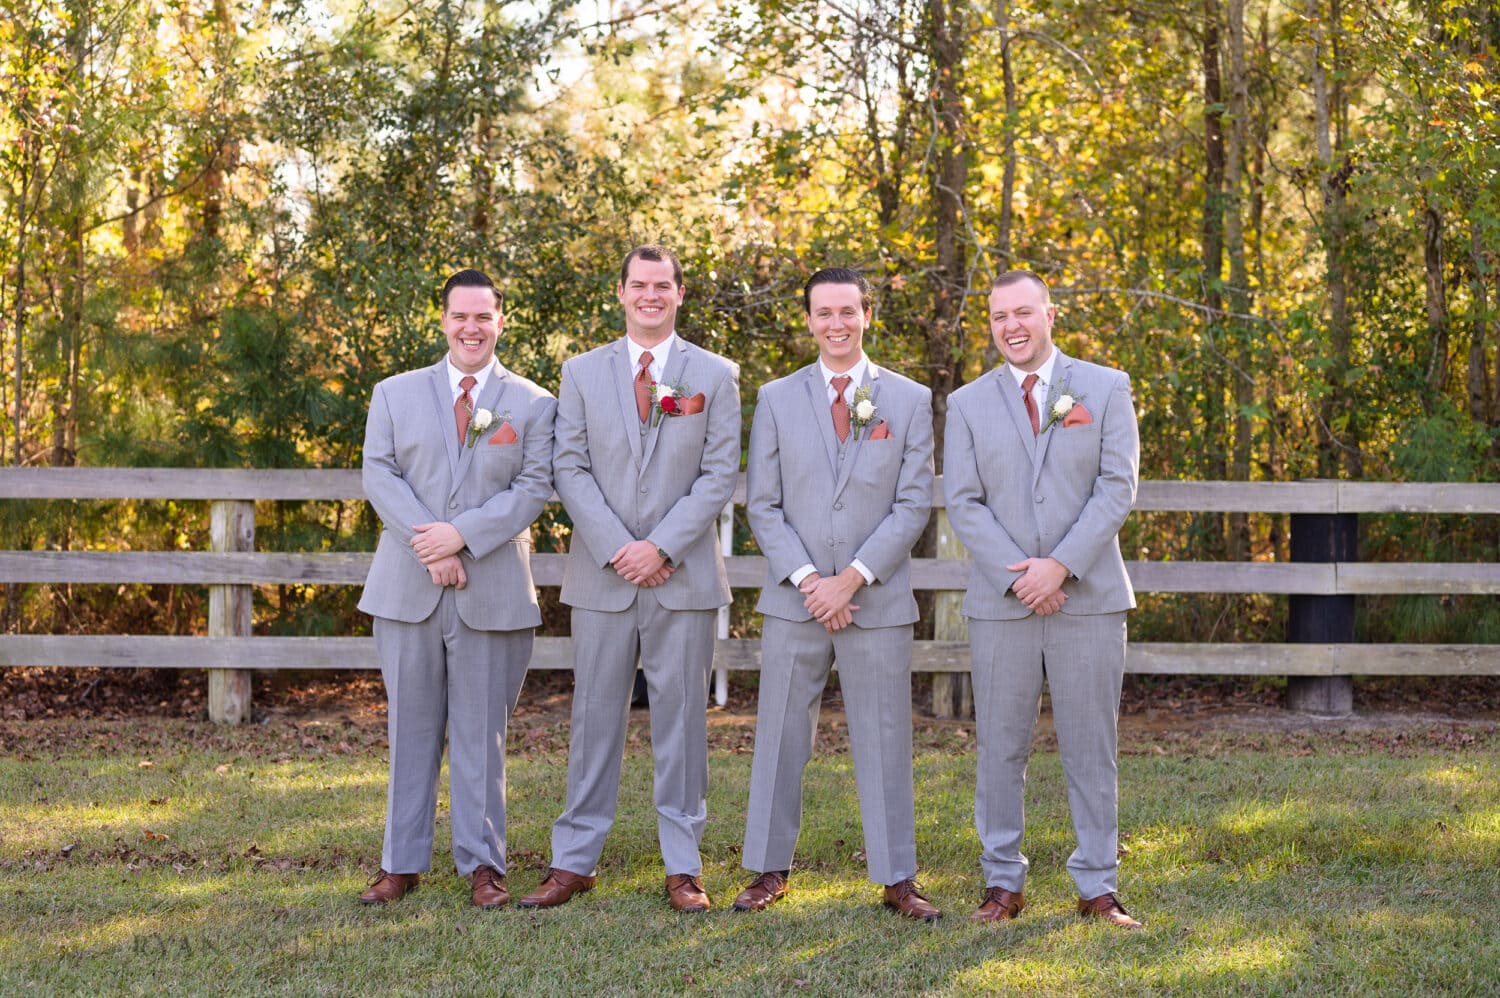 Groomsmen standing together - The Blessed Barn